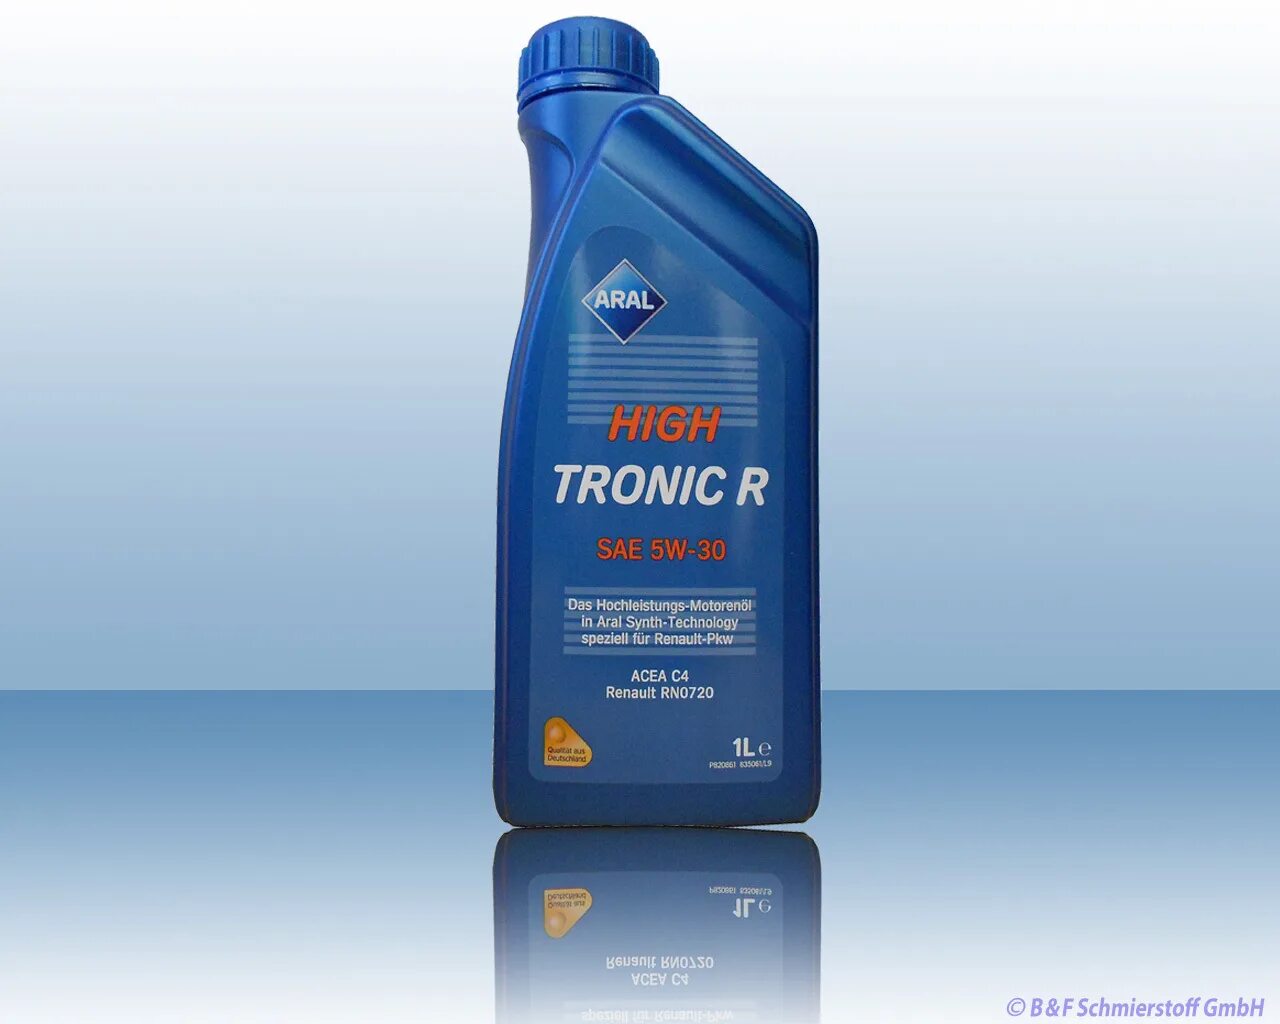 Renault rn. Aral масло High Tronic. Aral High Tronic r SAE 5w-30. Aral c4 5w-30. Aral High Tronic m SAE 5w-40.